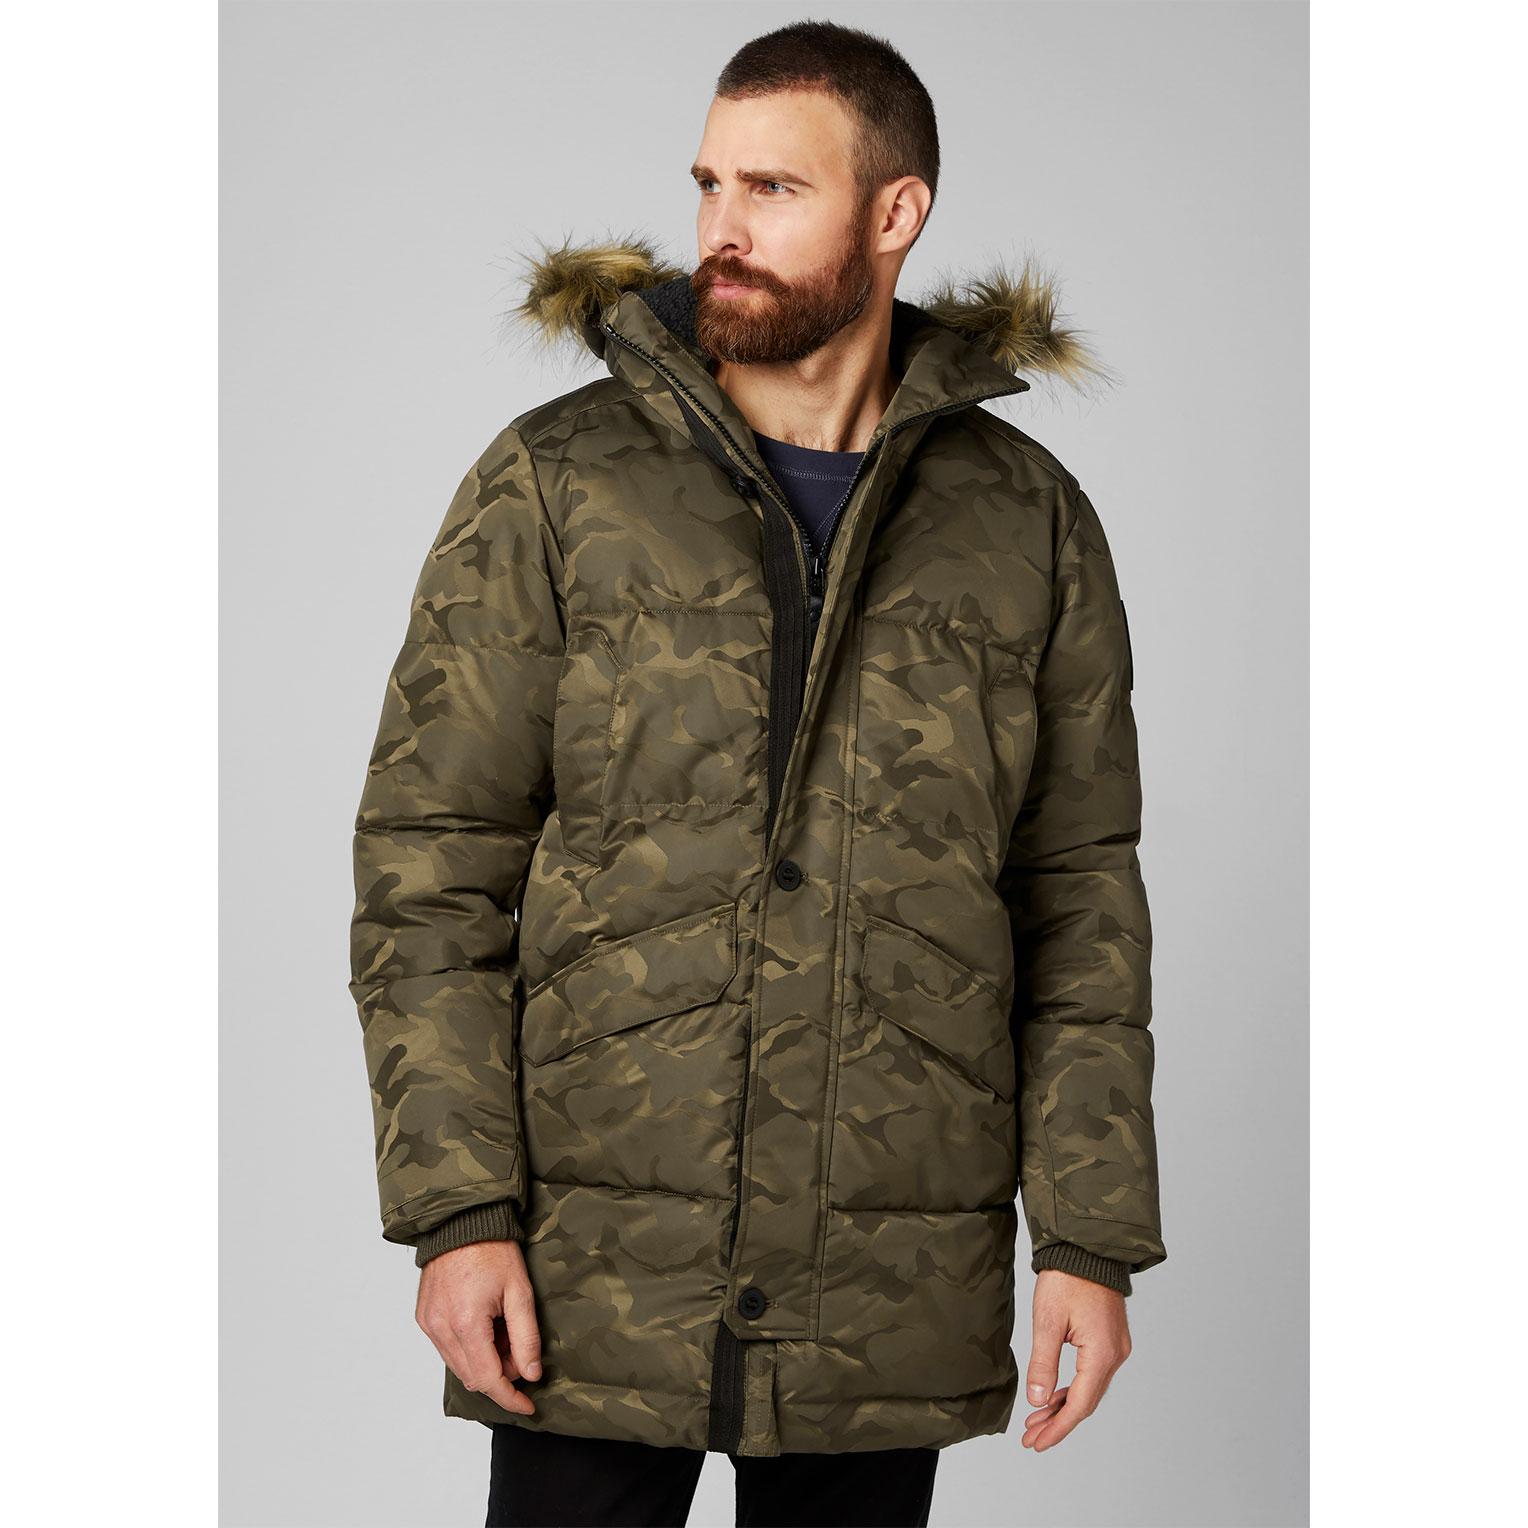 helly hansen men's barents insulated parka,Free delivery,album-web.org